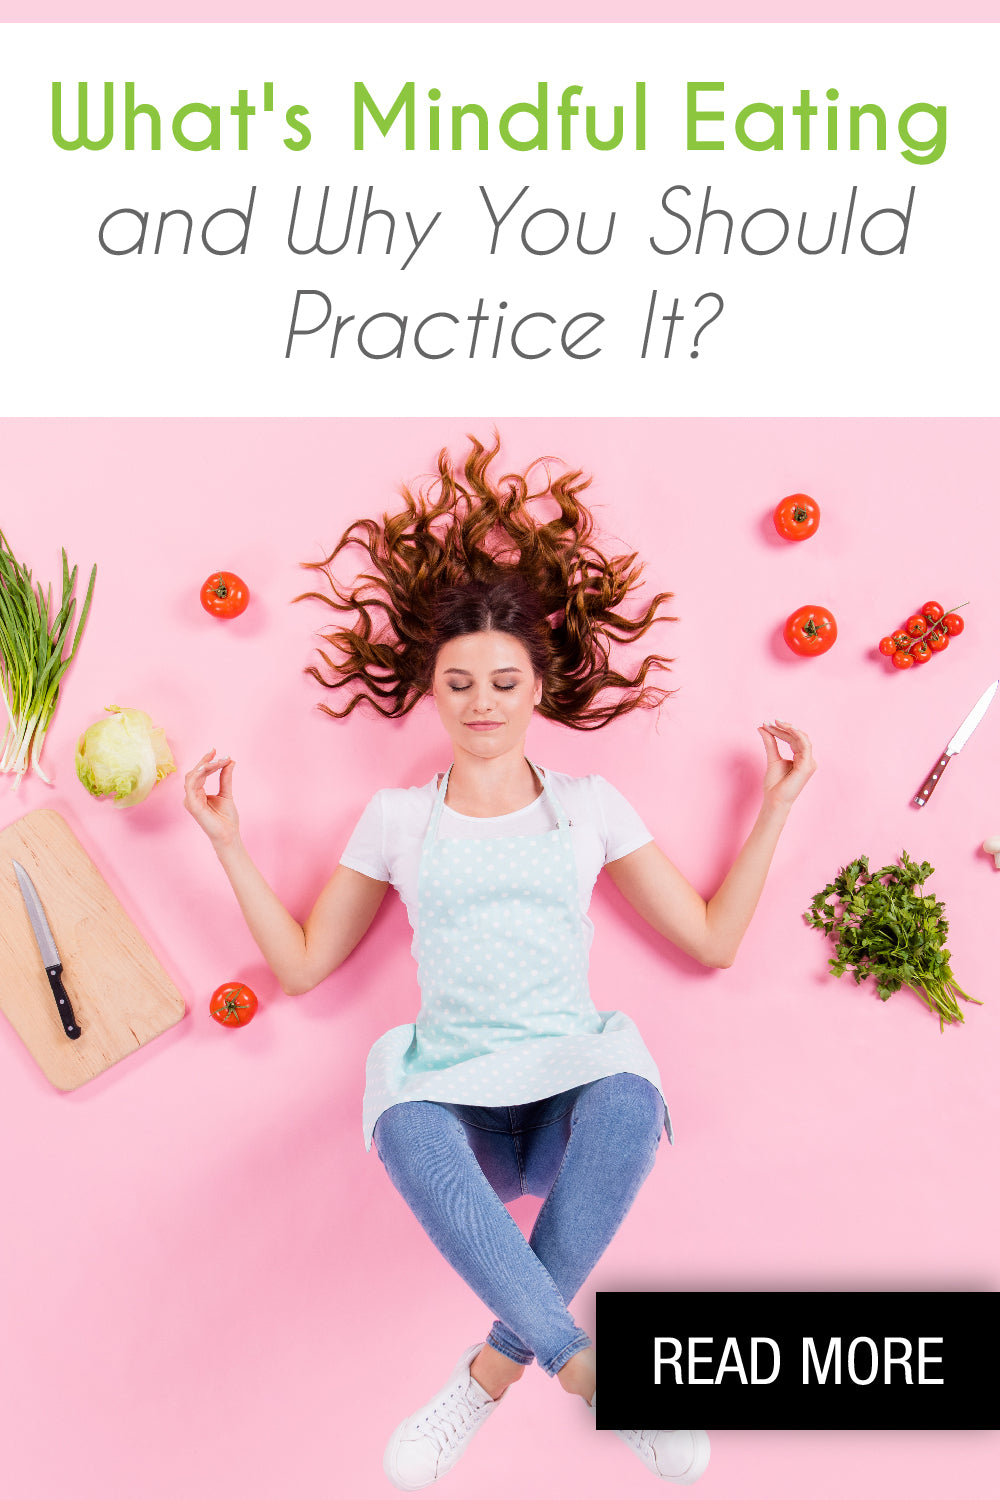 What’s Mindful Eating and Why You Should Practice It?